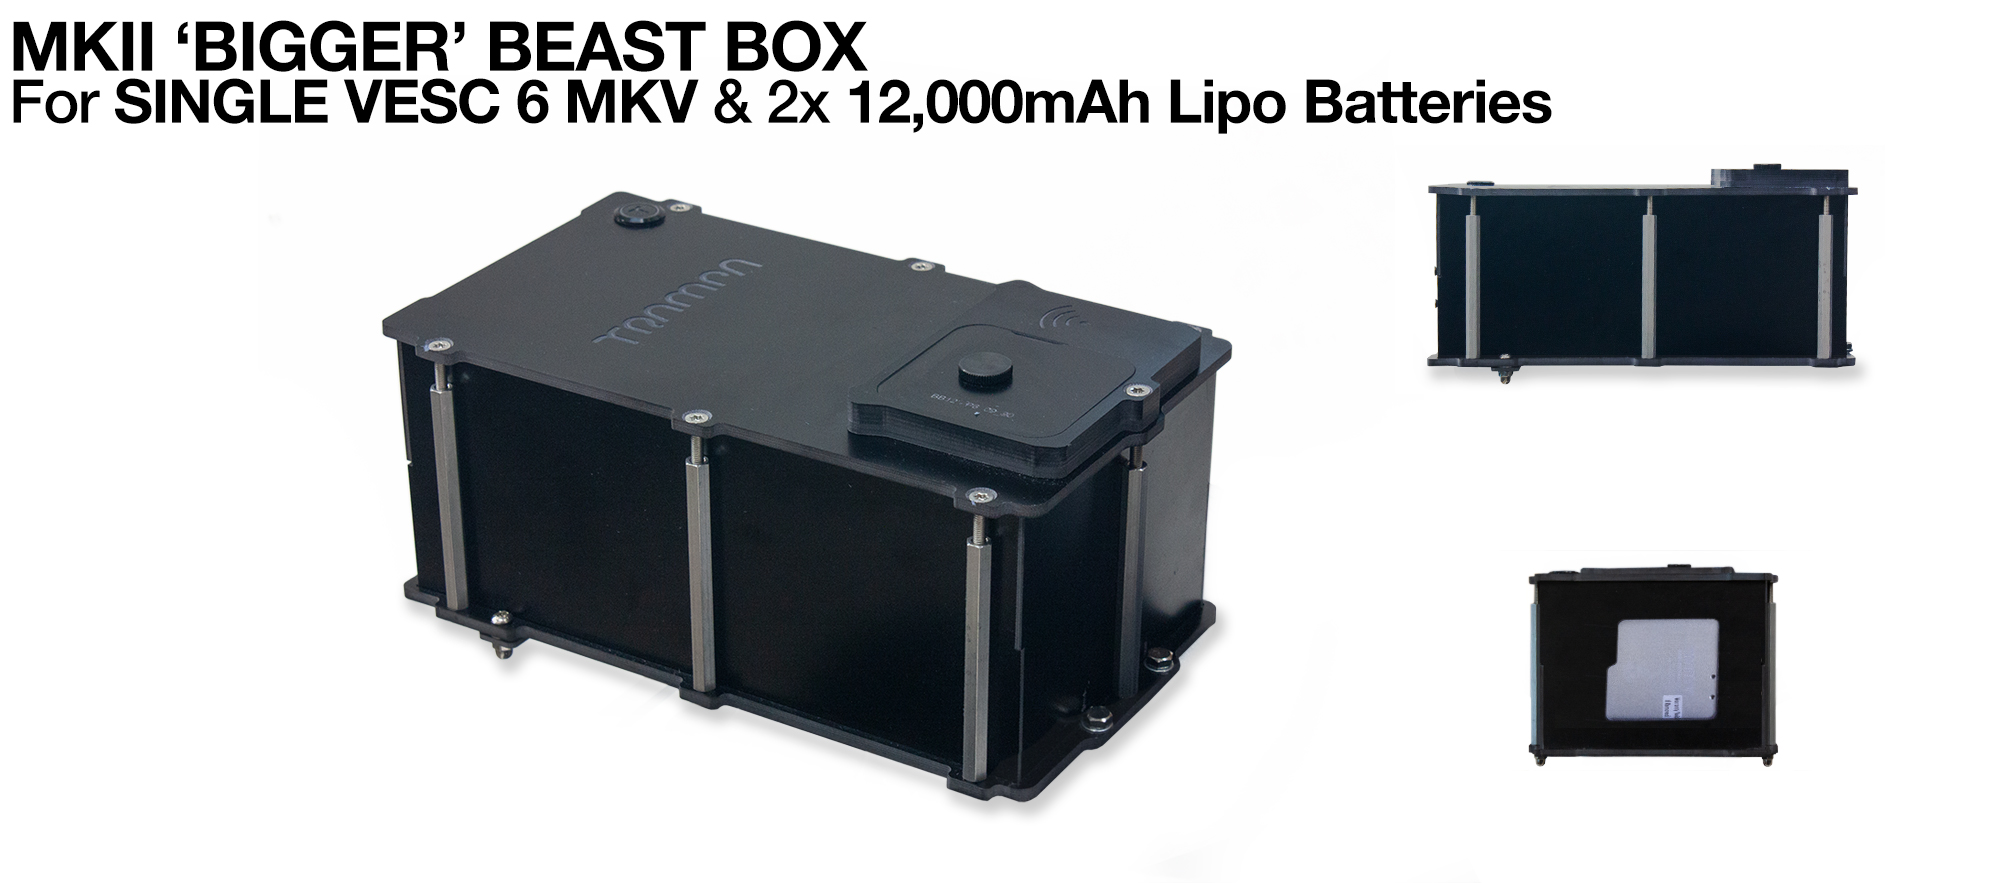 MKII 12A BIGGER BEAST Box fits 1x VESC 6 & 2x 6s 12A cells to give approx 15 miles range